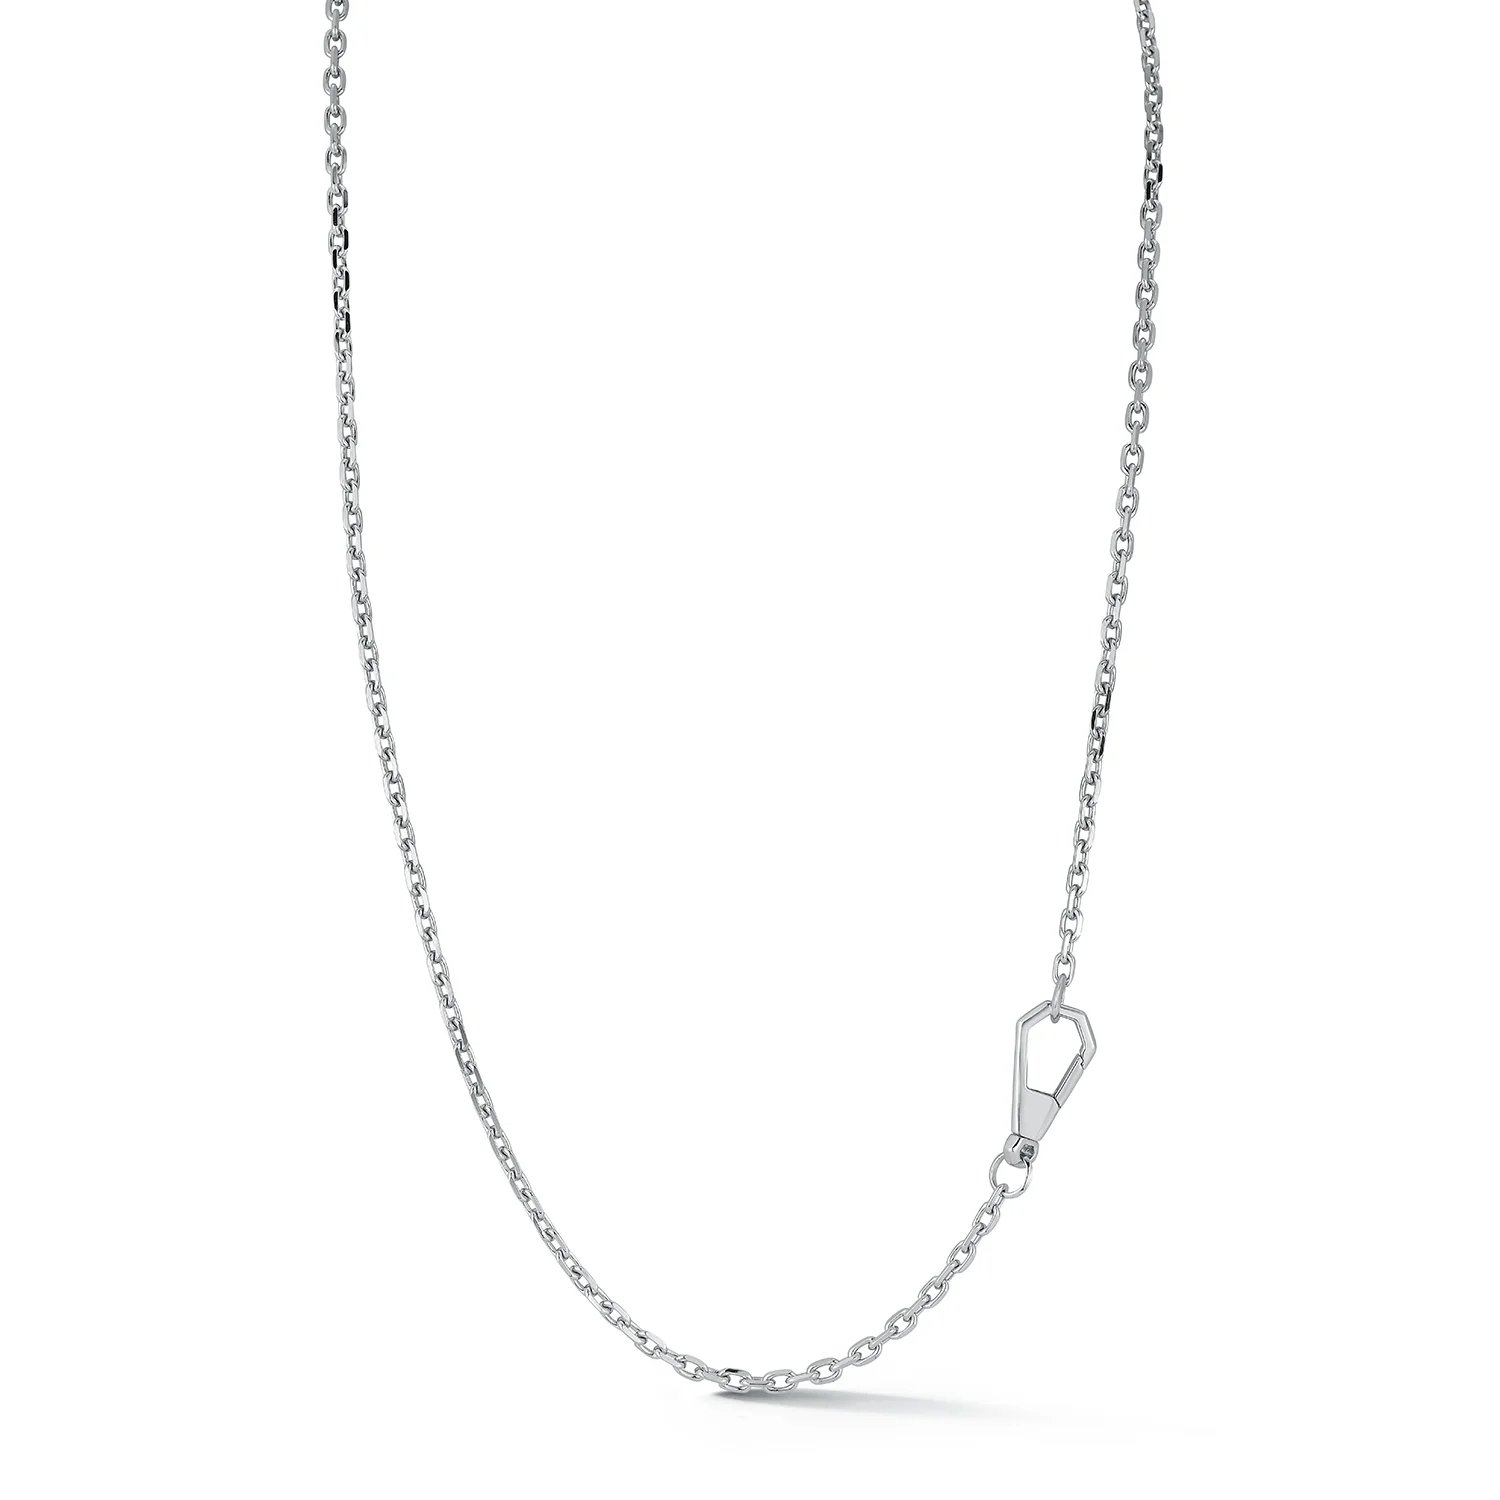 CARRINGTON STERLING SILVER CABLE CHAIN NECKLACE